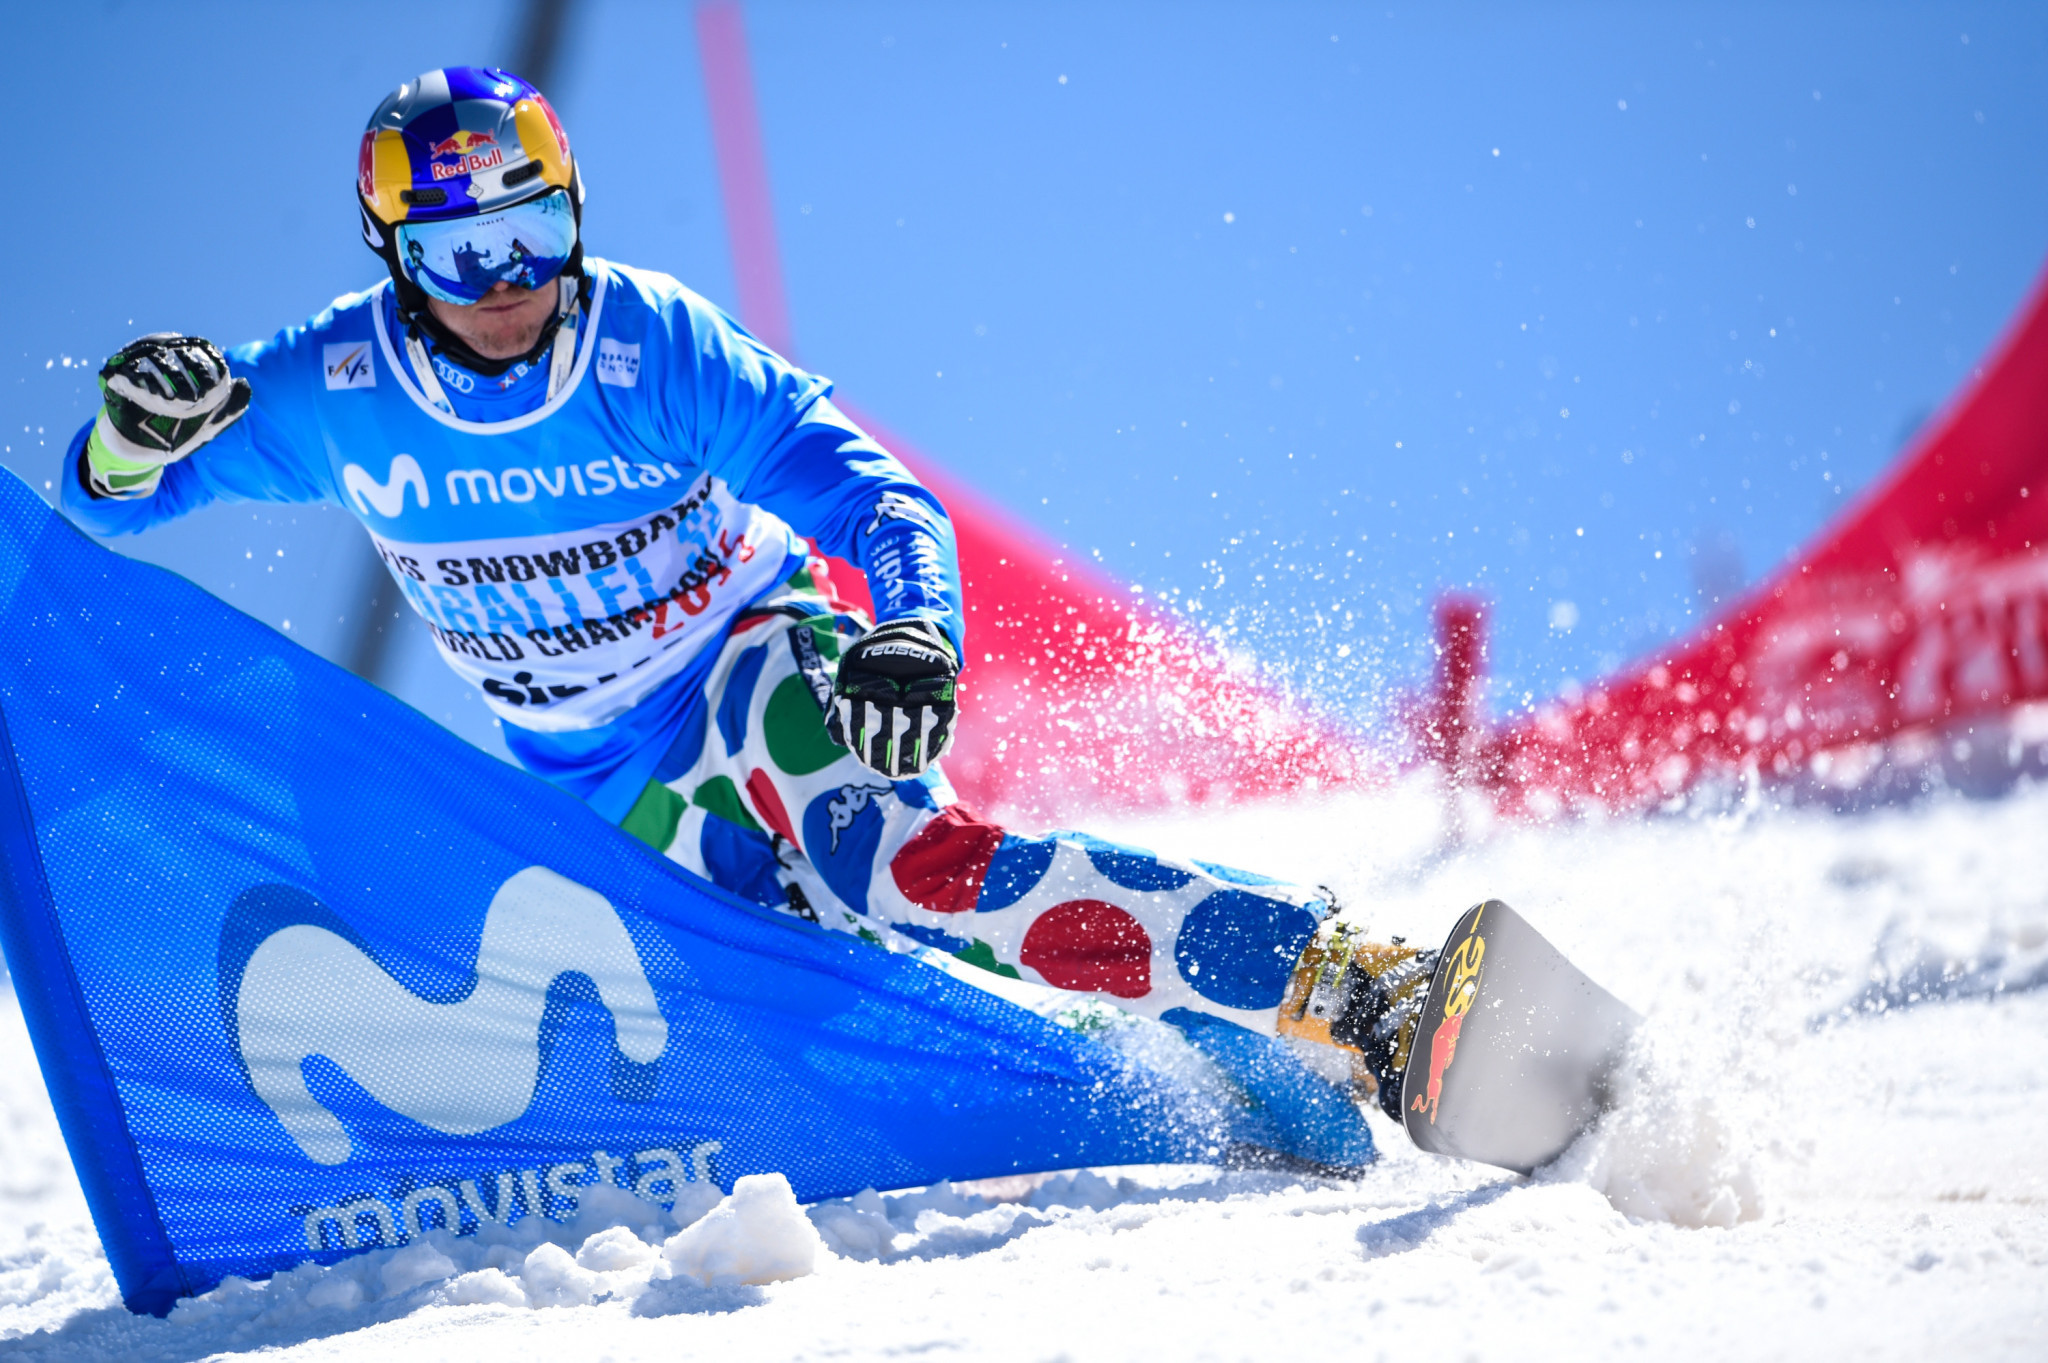 Fischnaller shines on home snow as Ledecká returns to the top at Snowboard World Cup